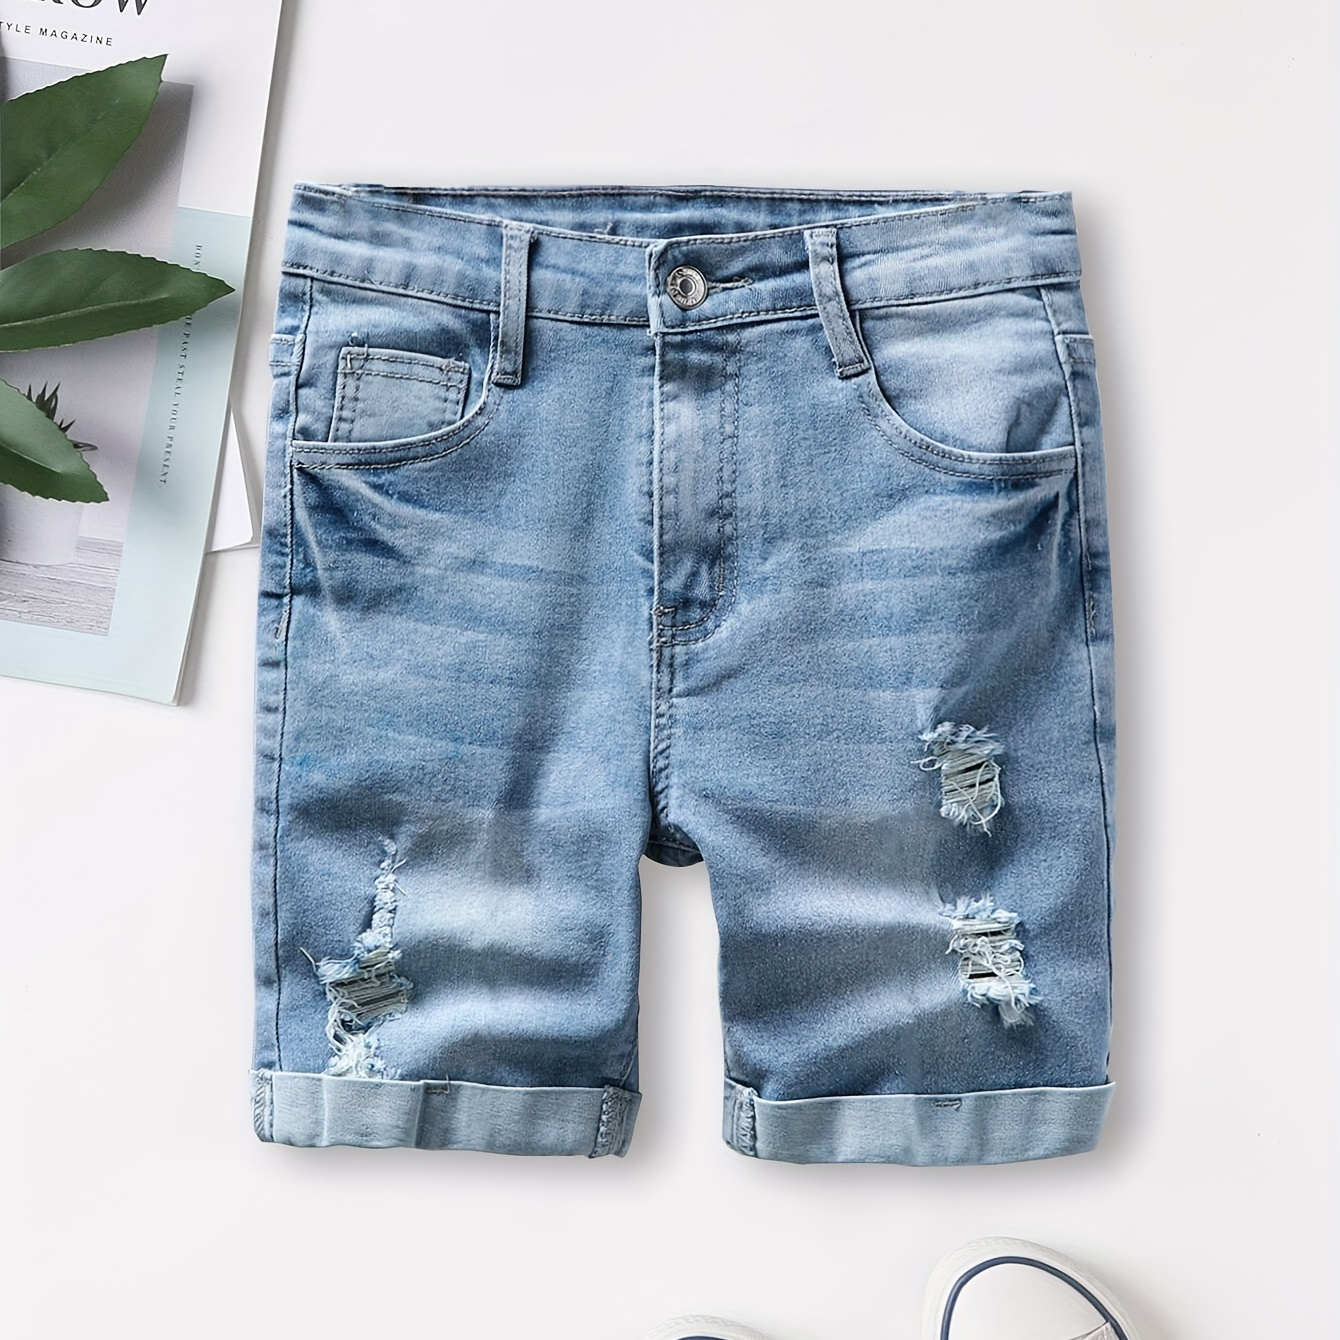 

Boys Casual Washed Ripped Denim Shorts, Stylish Distressed Jean Shorts For Summer Outdoor